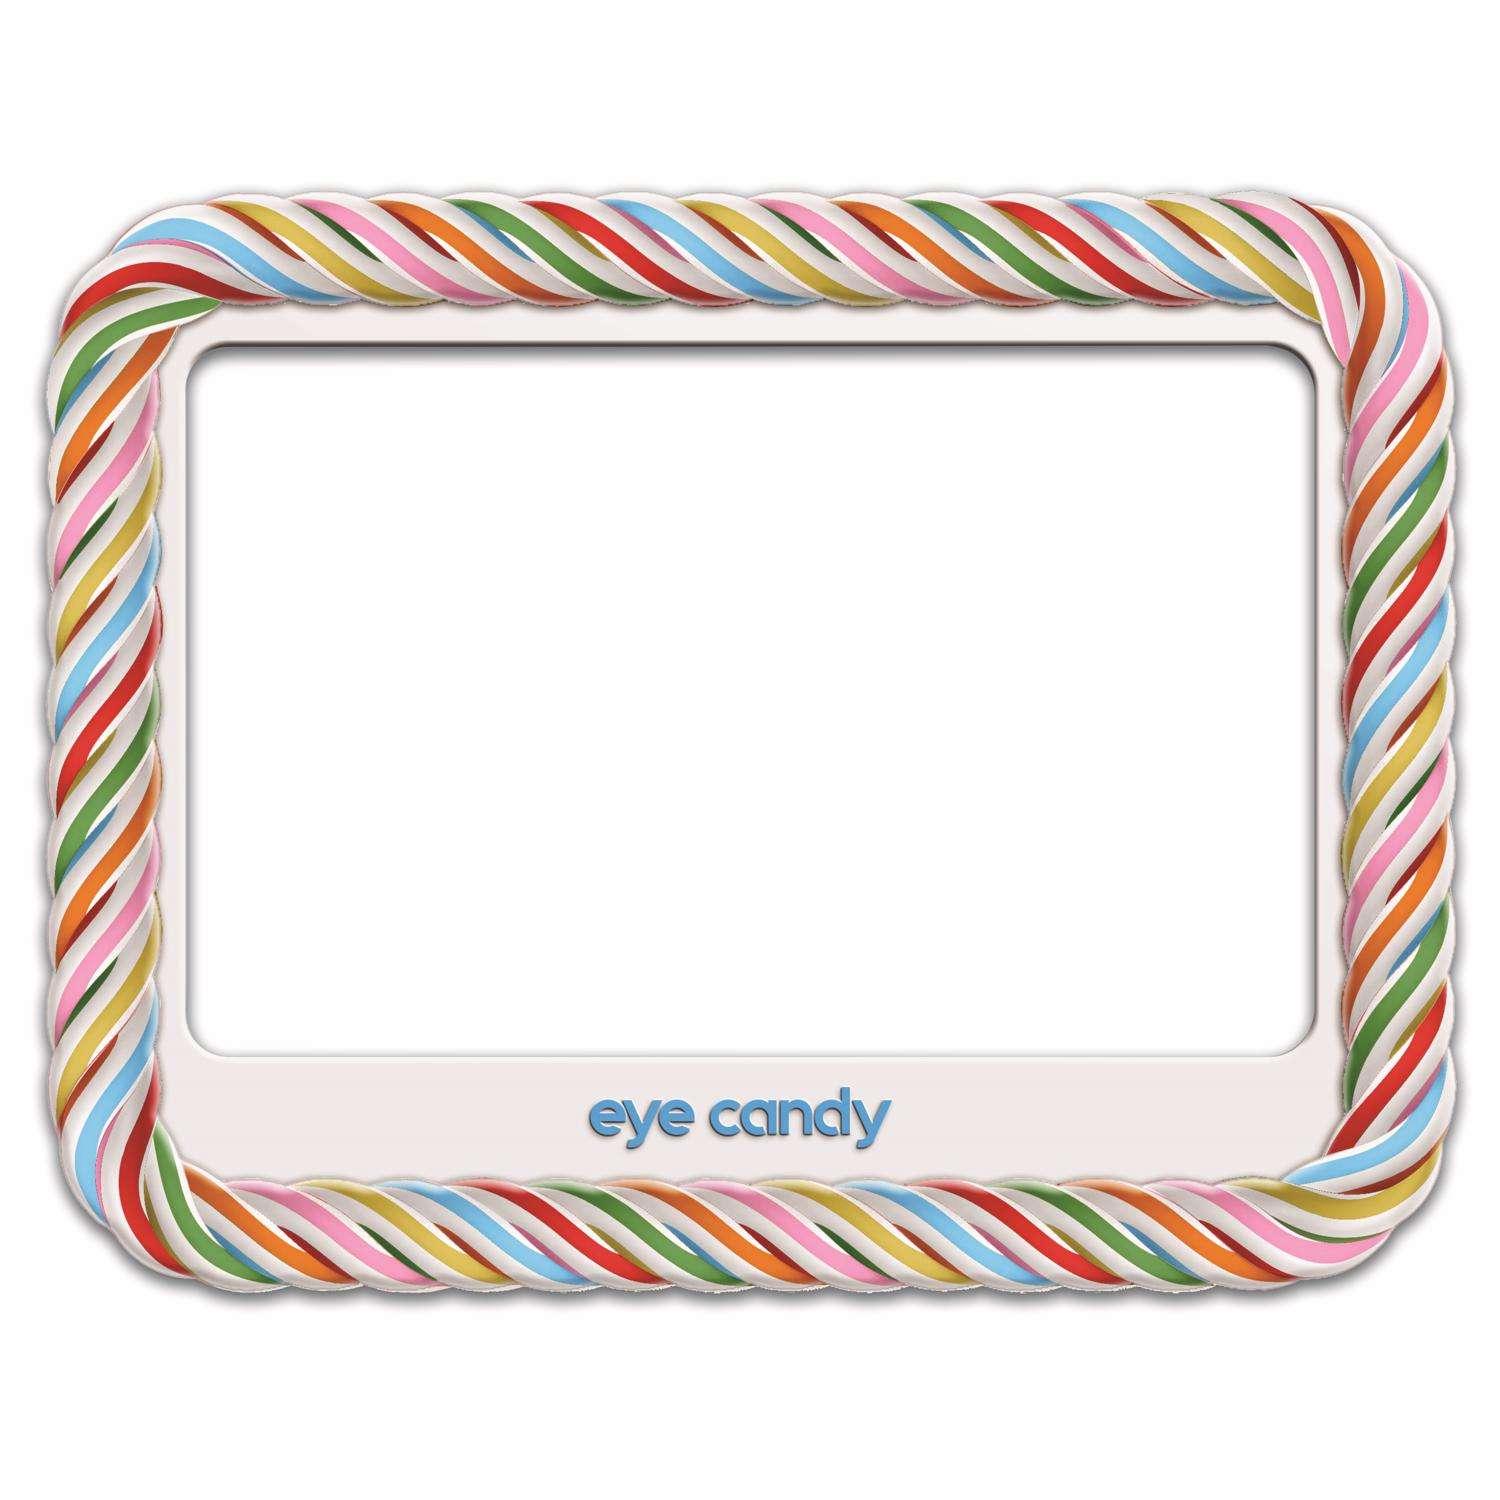 Eye Candy Full Page Magnifier Book Light With LED Lights, 51% OFF